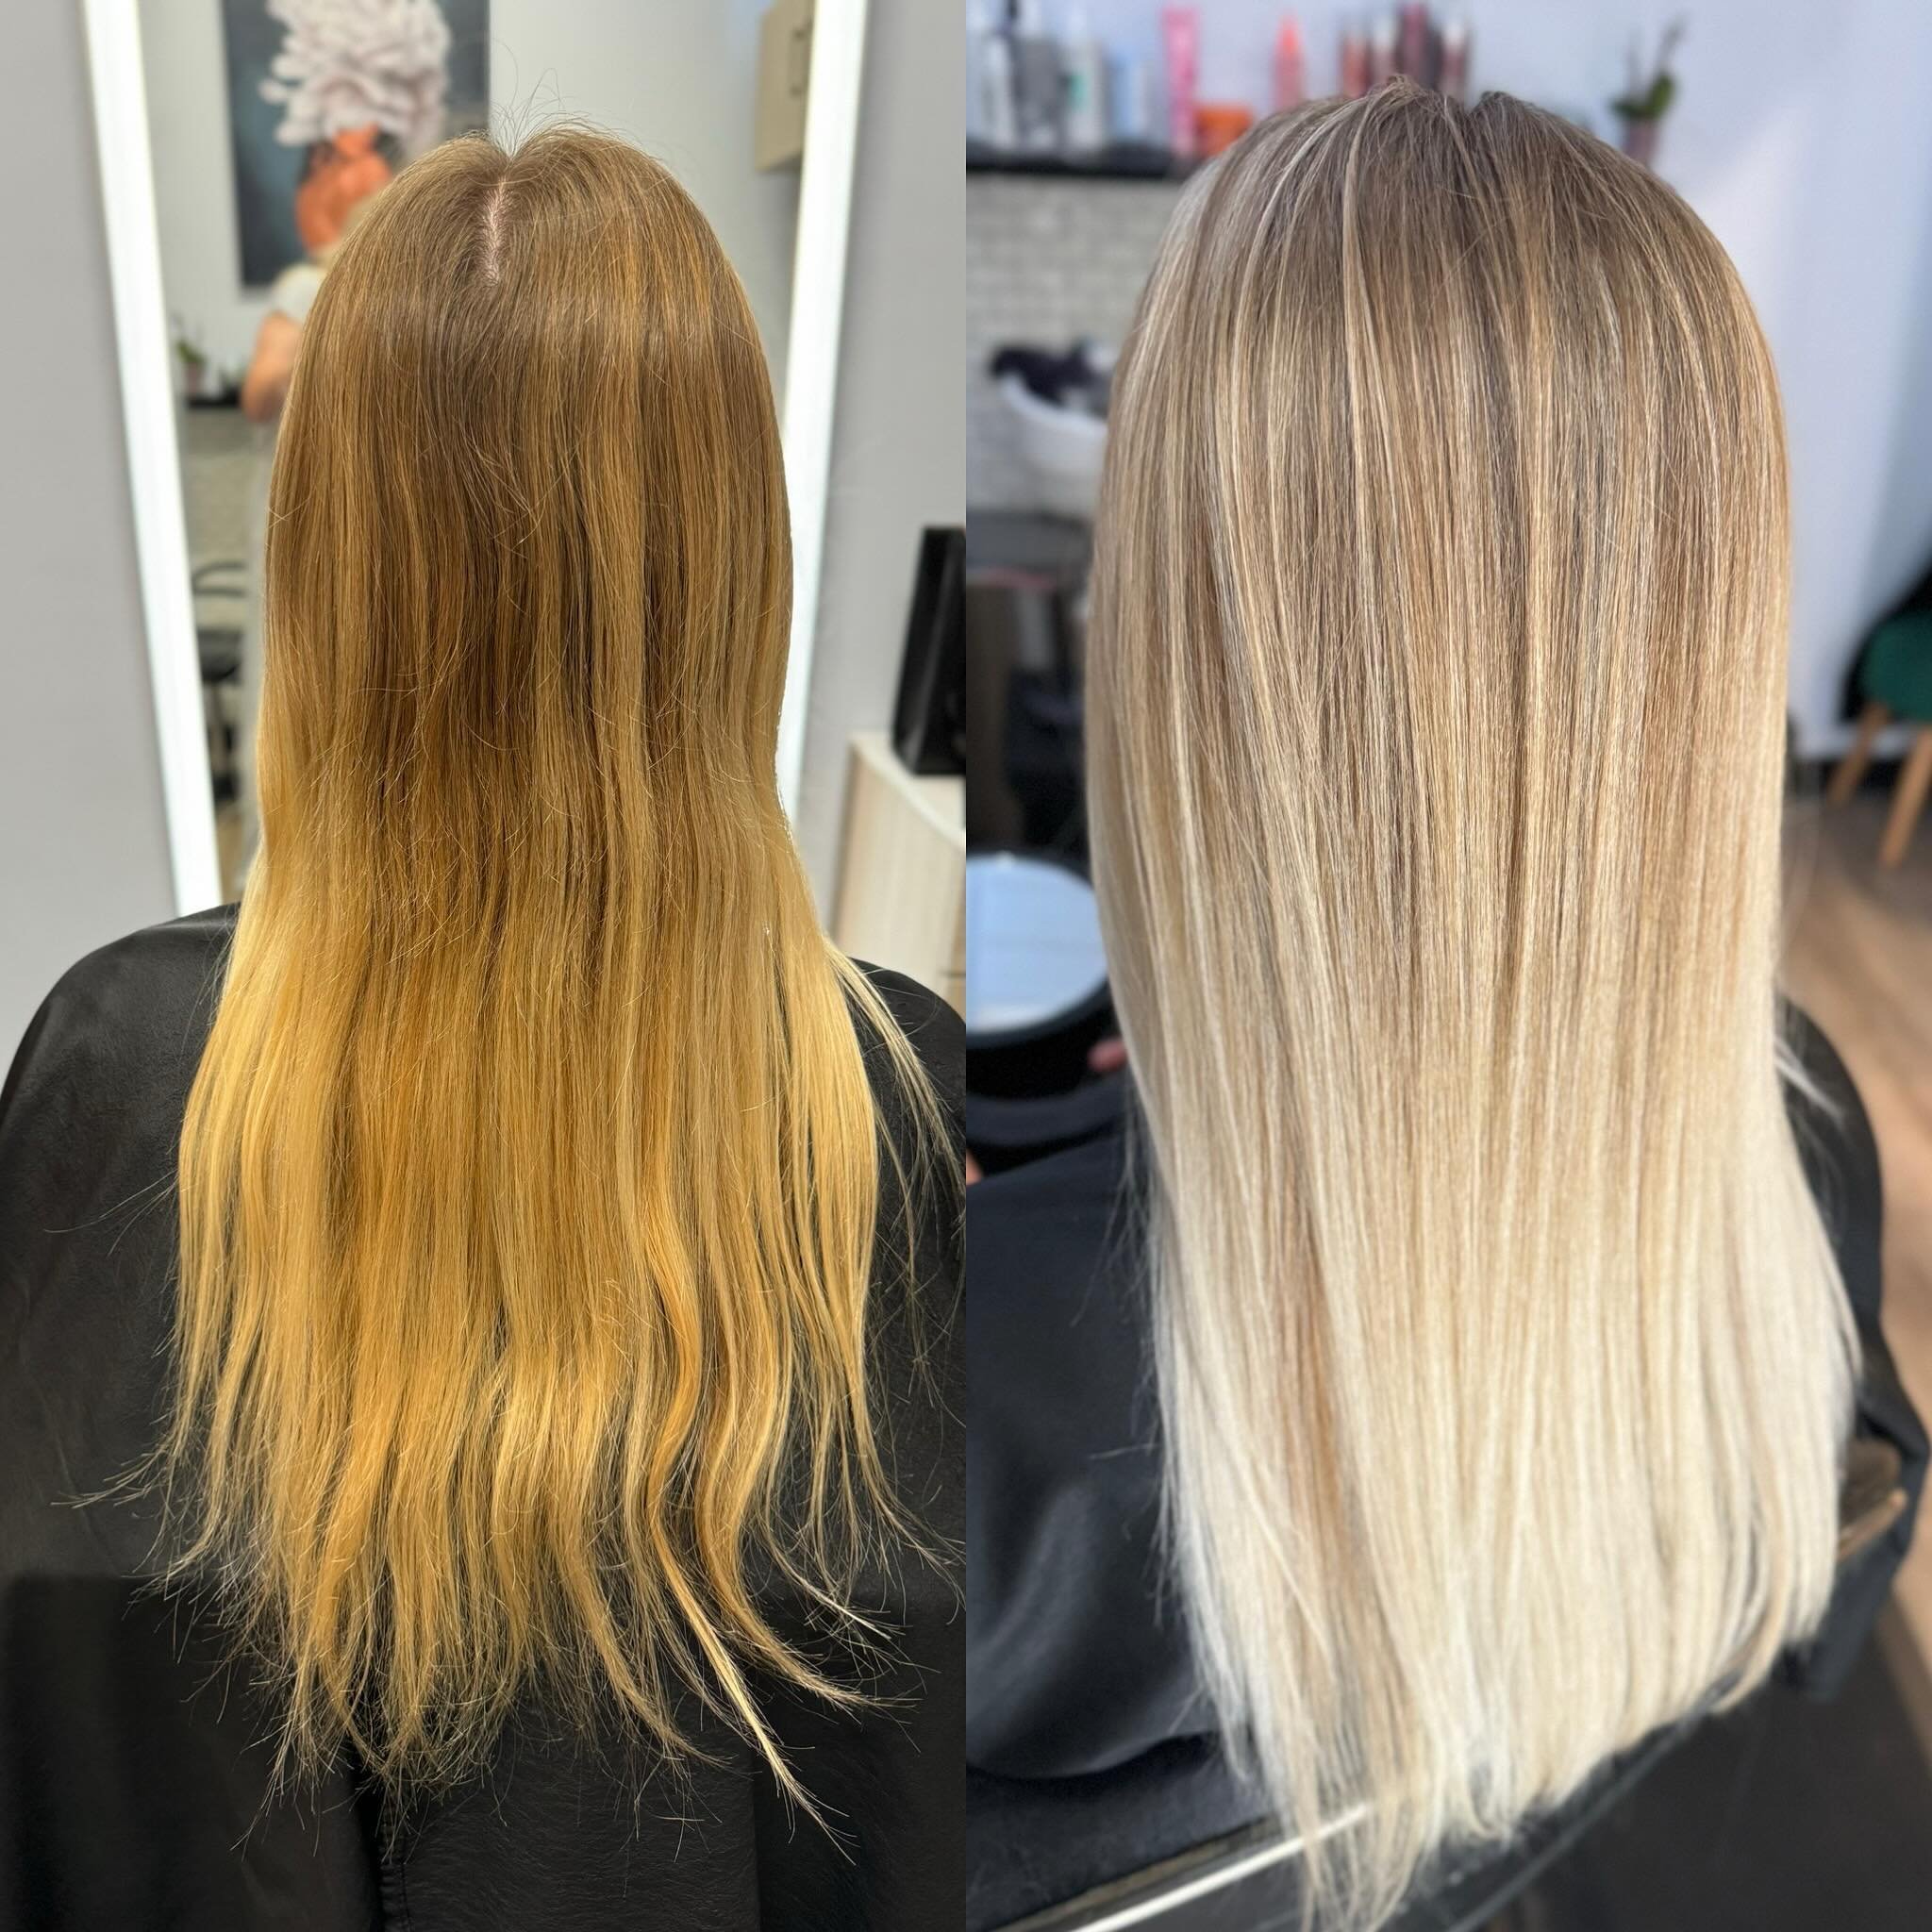 blended ✔️ bright ✔️ buttery ✔️ BLONDE ✔️✔️

#transformationtuesday #blonde #blondehair #beforeandafter #butteryblonde #healthyblonde #newclient #houstonhairstylist #cypresstxhairstylist #LOFT87 #aHAIRexperience